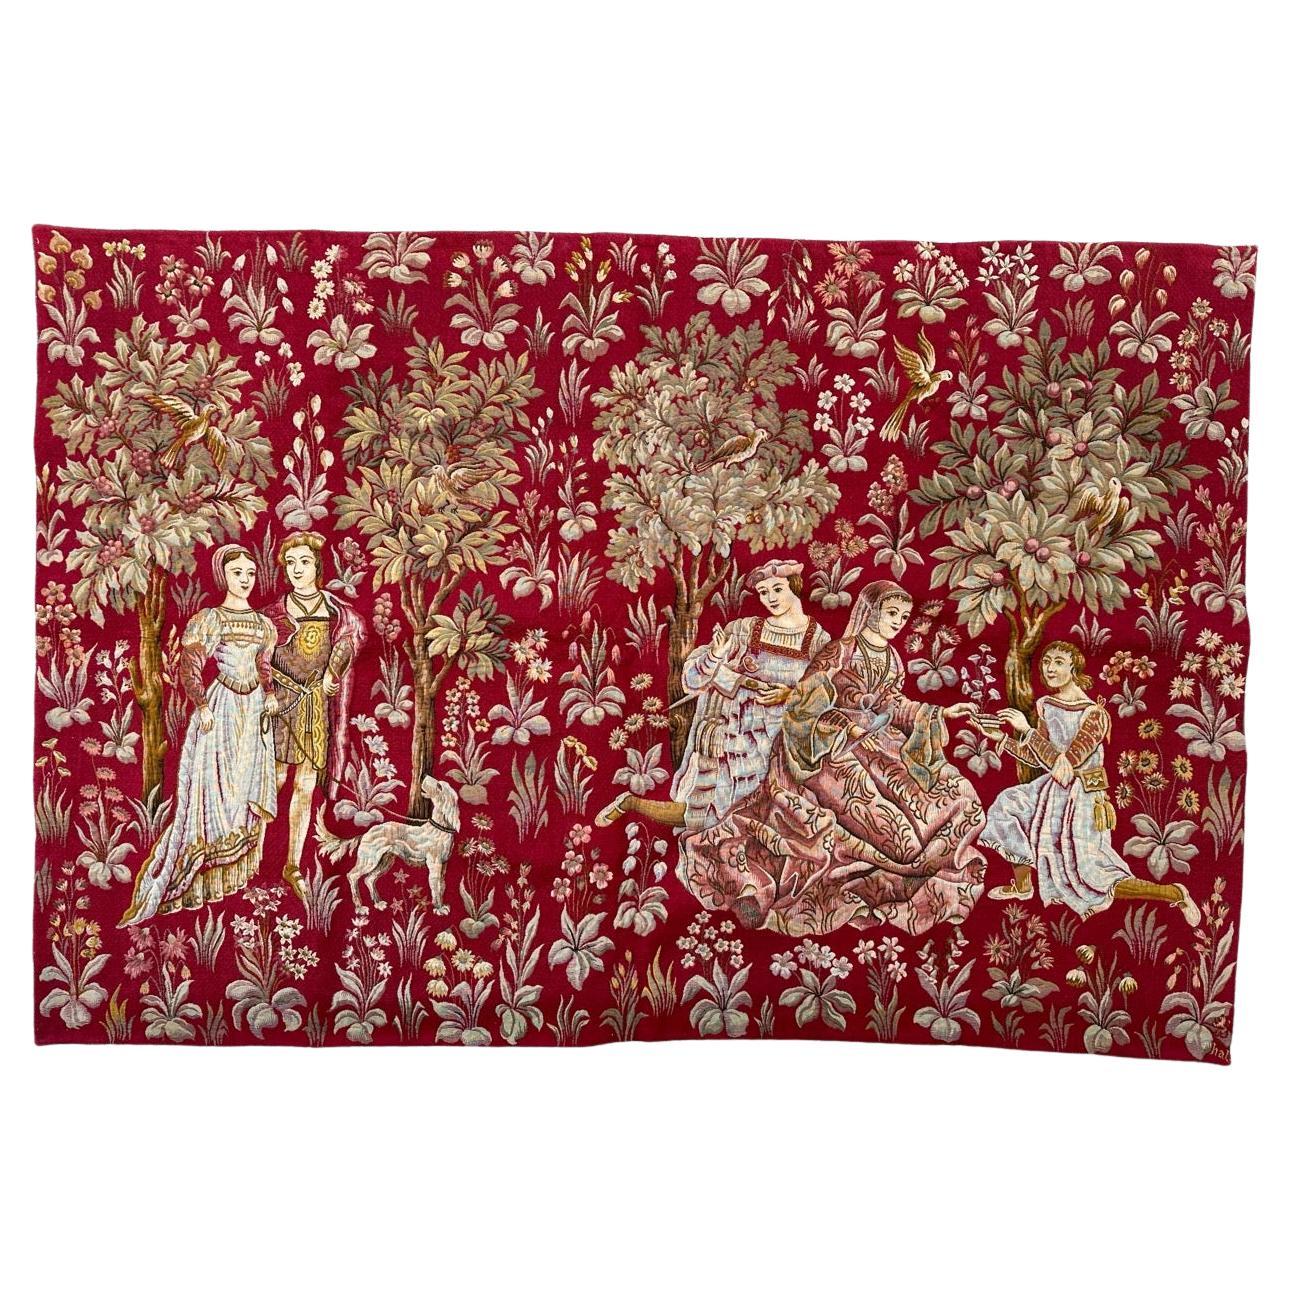 Bobyrug's Pretty Jaquar Tapestry Aubusson Museum Style Medieval Design im Angebot